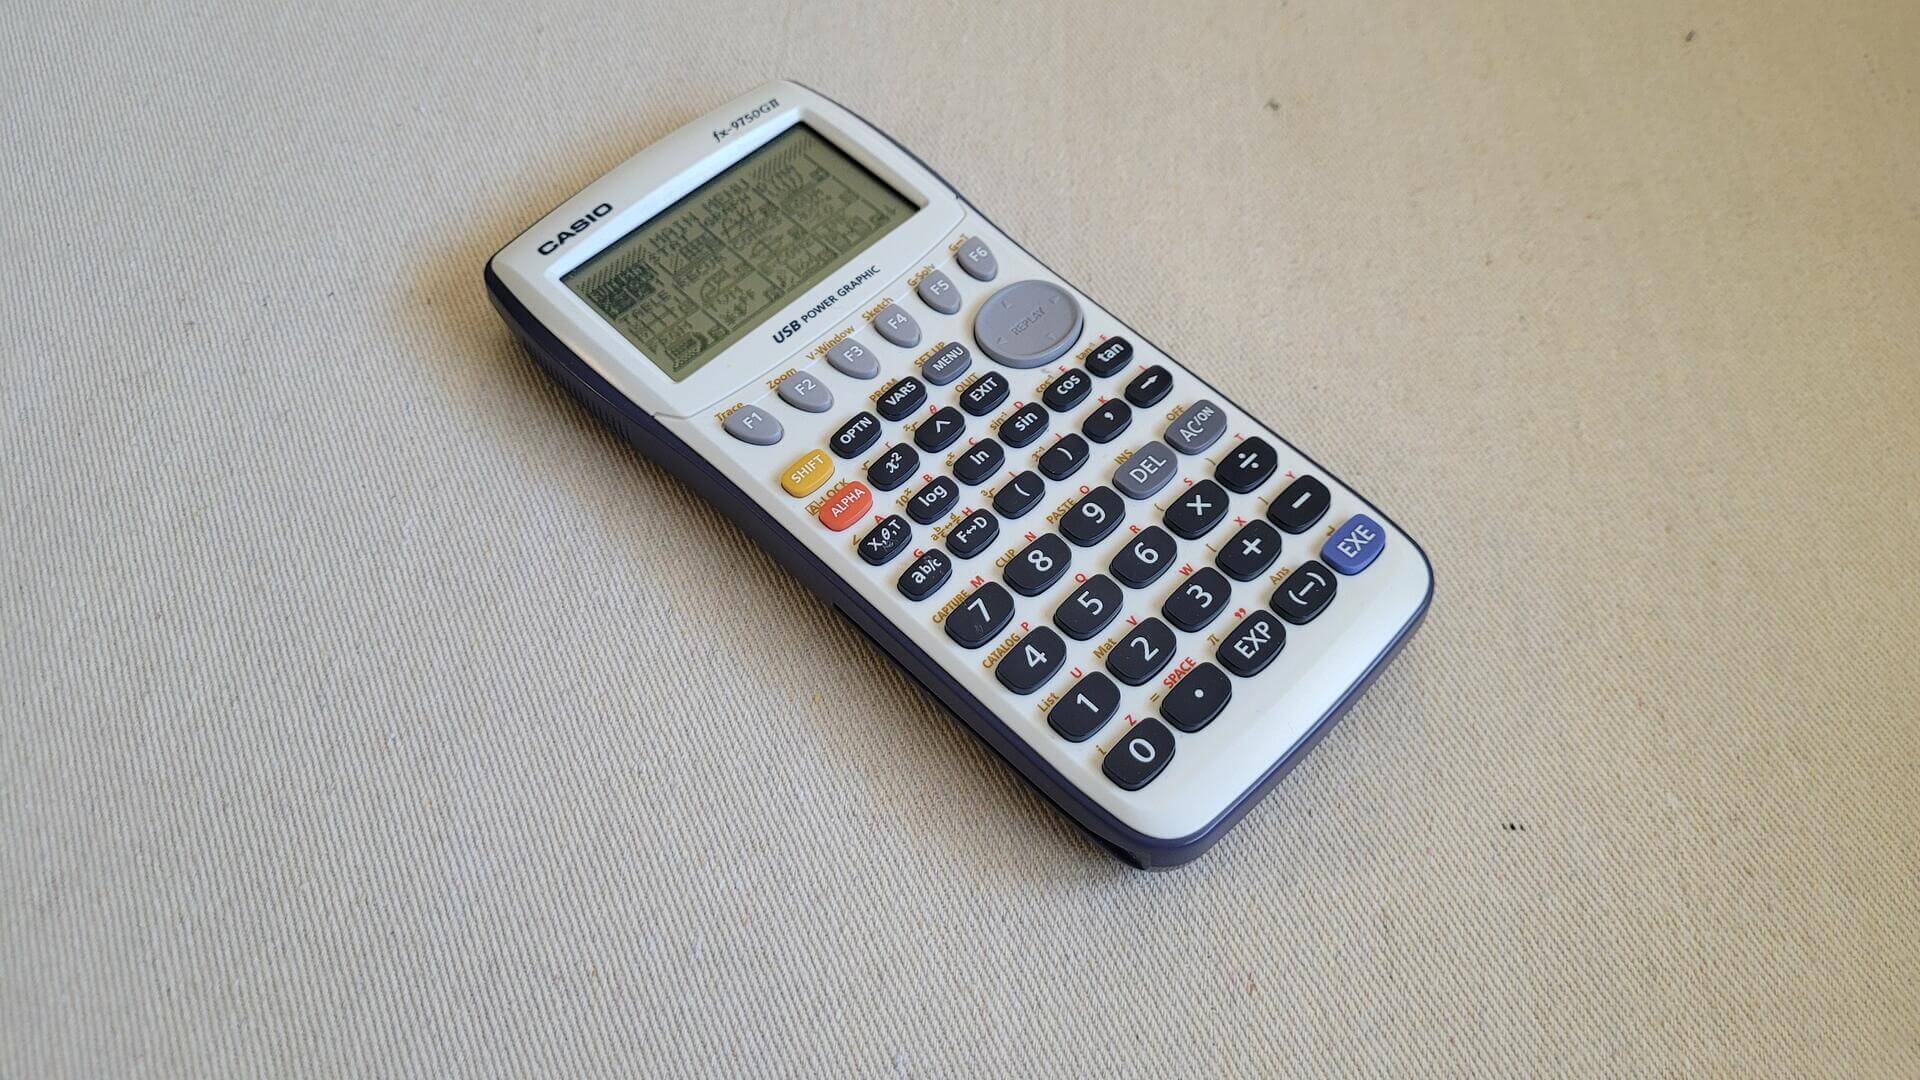 Casio FX-9750GII graphing calculator comes with numerous enhancements including USB connectivity, AP statistics features, pie charts, bar graphs and more